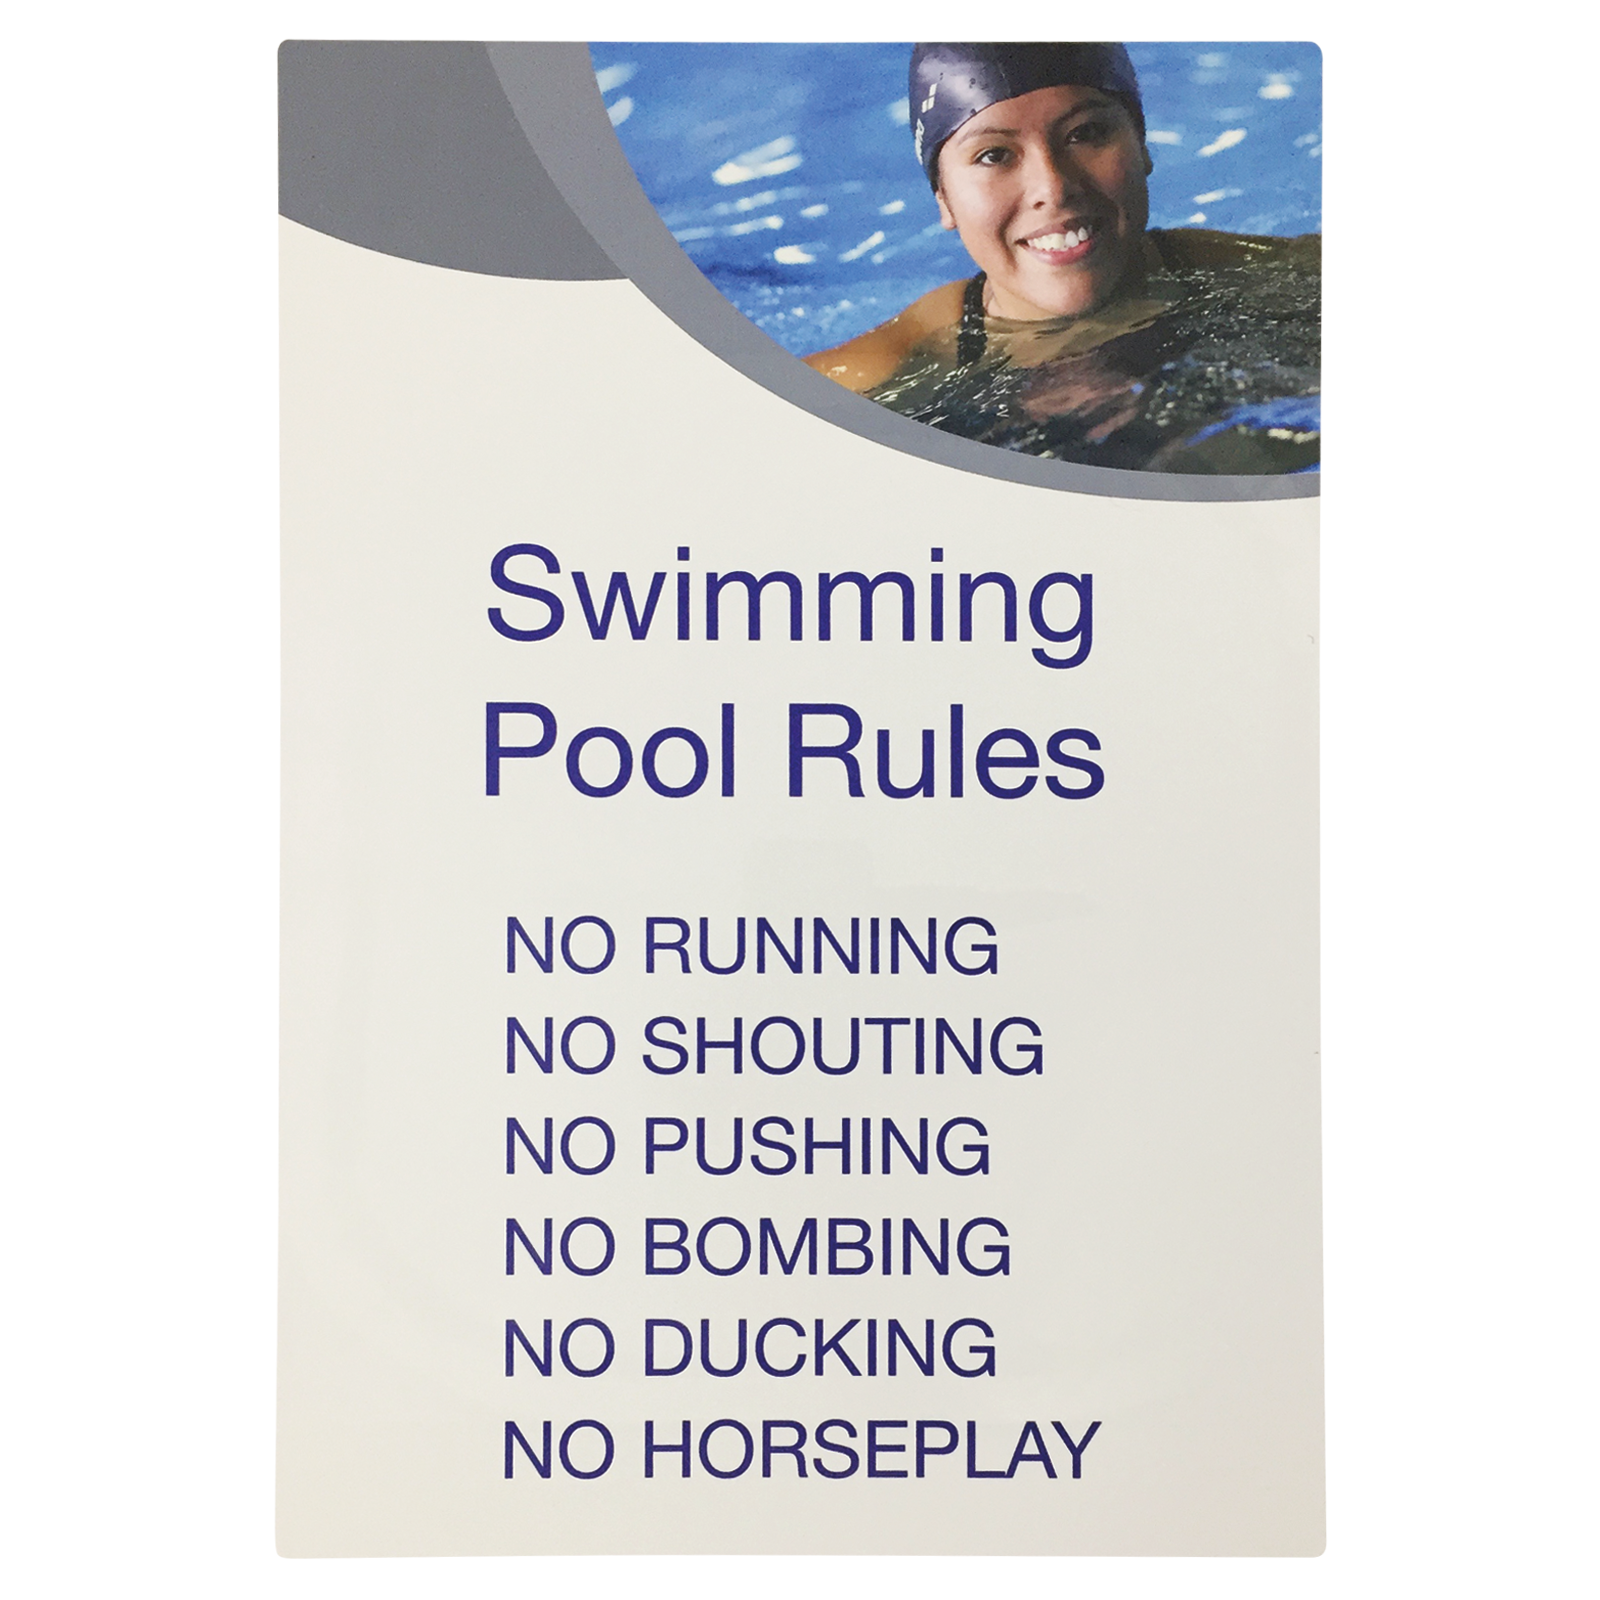 Swimming Pool Bullet Point Rules Notice